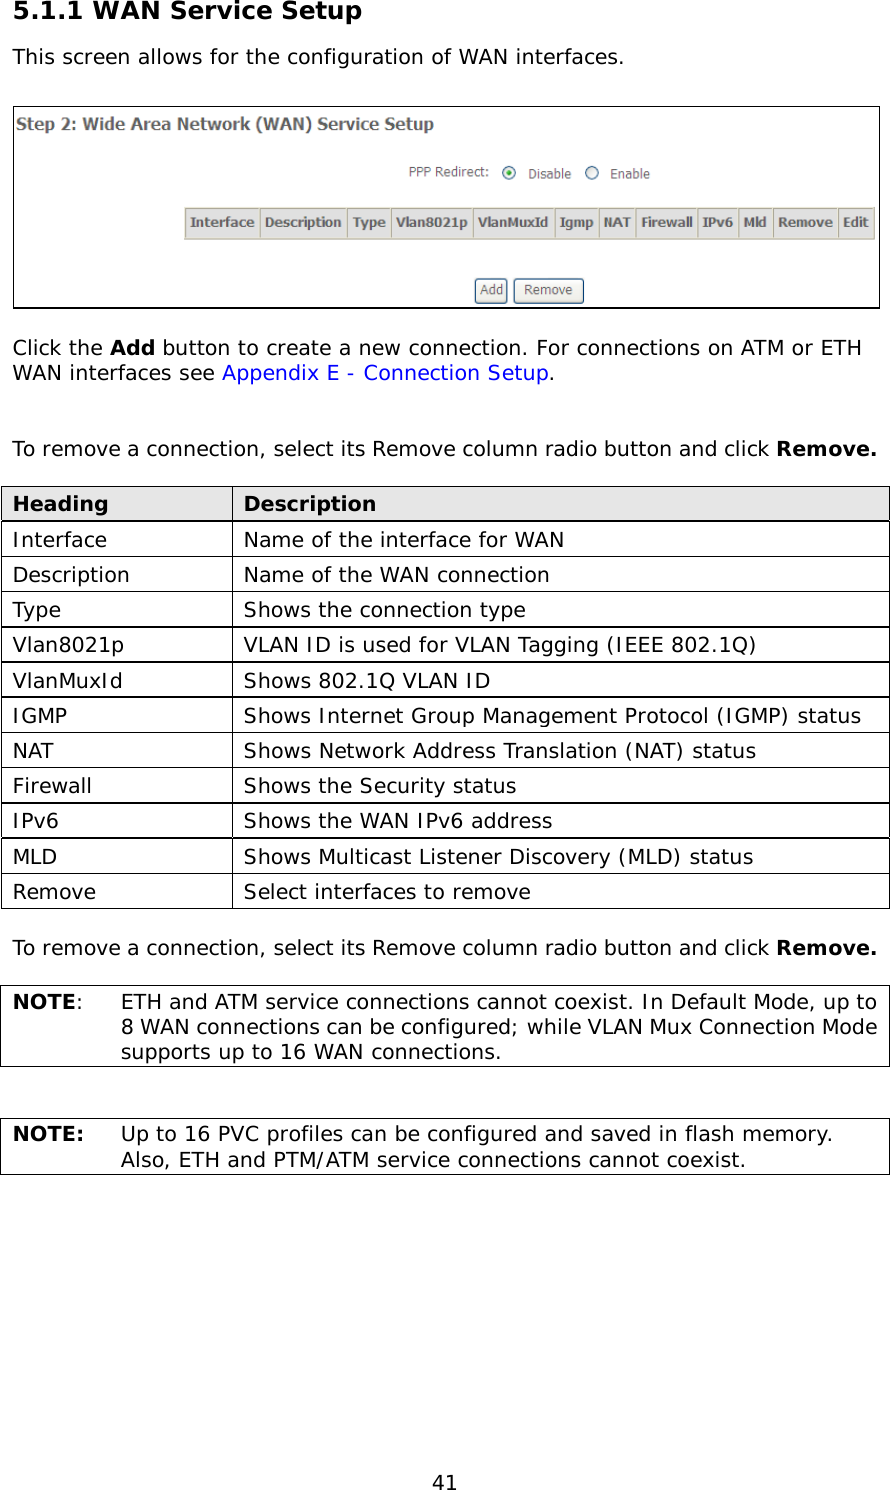  41 5.1.1 WAN Service Setup This screen allows for the configuration of WAN interfaces.    Click the Add button to create a new connection. For connections on ATM or ETH WAN interfaces see Appendix E - Connection Setup.    To remove a connection, select its Remove column radio button and click Remove.  Heading Description Interface  Name of the interface for WAN Description Name of the WAN connection Type Shows the connection type  Vlan8021p VLAN ID is used for VLAN Tagging (IEEE 802.1Q) VlanMuxId Shows 802.1Q VLAN ID IGMP Shows Internet Group Management Protocol (IGMP) status NAT Shows Network Address Translation (NAT) status Firewall Shows the Security status IPv6 Shows the WAN IPv6 address MLD Shows Multicast Listener Discovery (MLD) status Remove Select interfaces to remove  To remove a connection, select its Remove column radio button and click Remove.  NOTE:  ETH and ATM service connections cannot coexist. In Default Mode, up to 8 WAN connections can be configured; while VLAN Mux Connection Mode supports up to 16 WAN connections.   NOTE: Up to 16 PVC profiles can be configured and saved in flash memory.  Also, ETH and PTM/ATM service connections cannot coexist.  